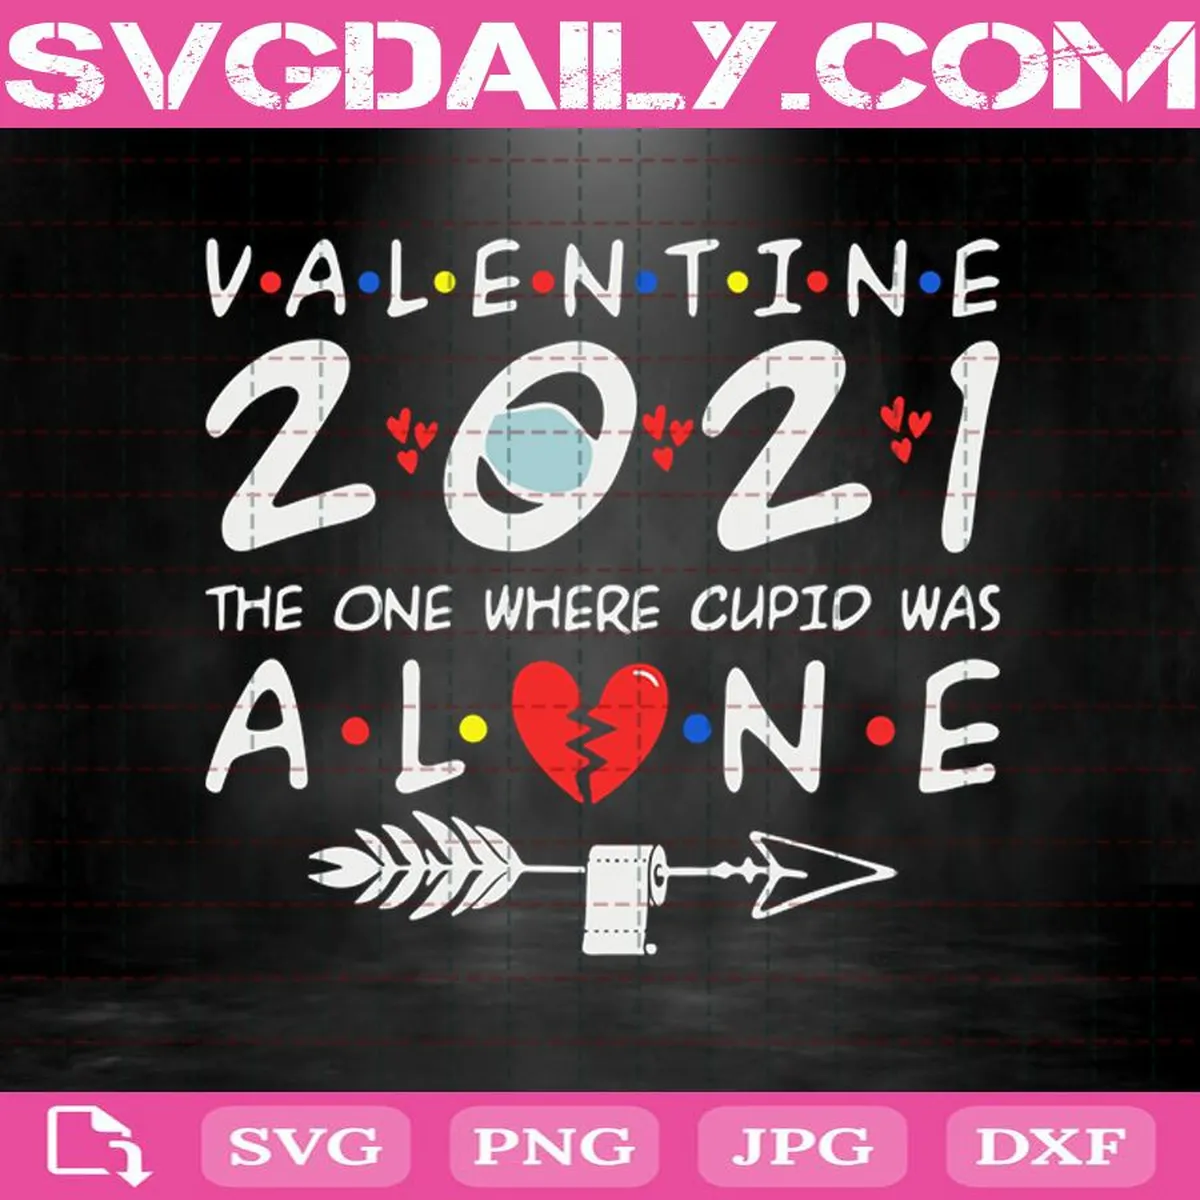 Valentine 2021 The One Where Cupid Was Alone Svg, Valentine’s Day Svg, Valentine’s Day Wear Mask Svg, Toilet Paper Svg